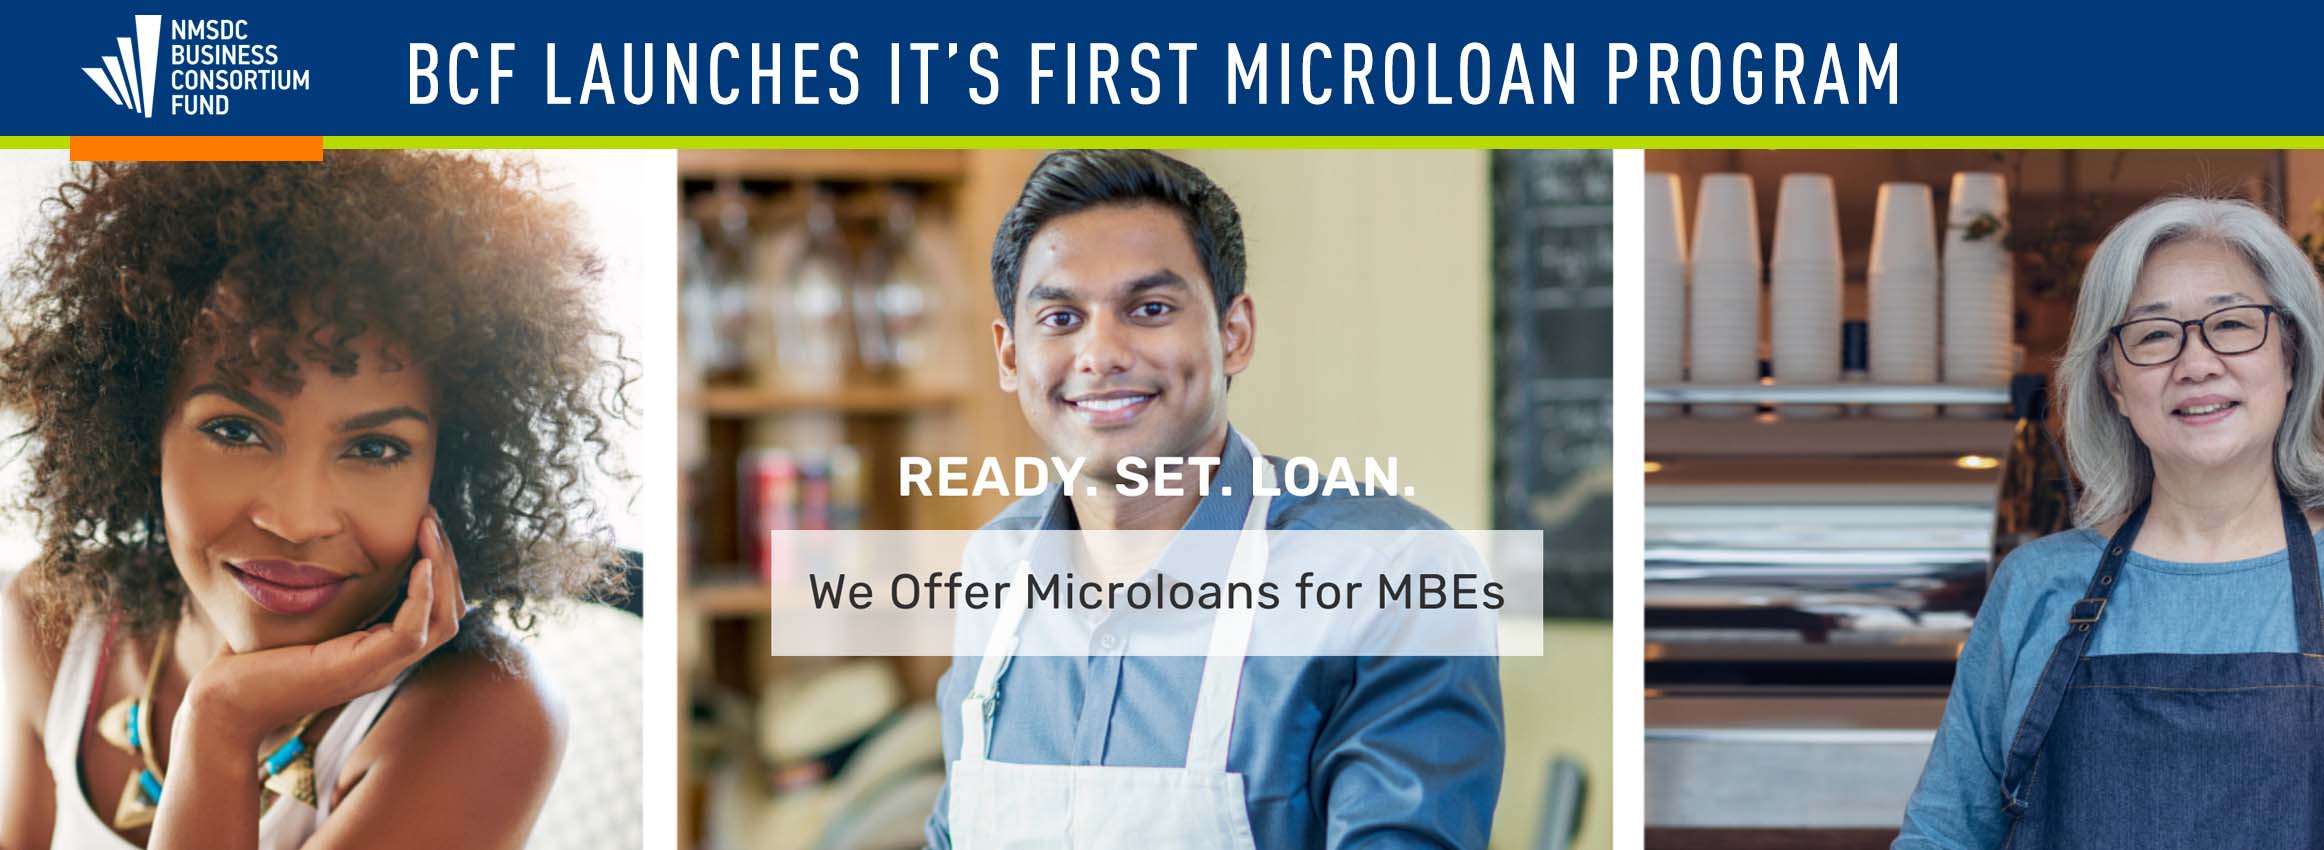 NMSDC Business Consortium Fund (BCF) launches It's First Microloan